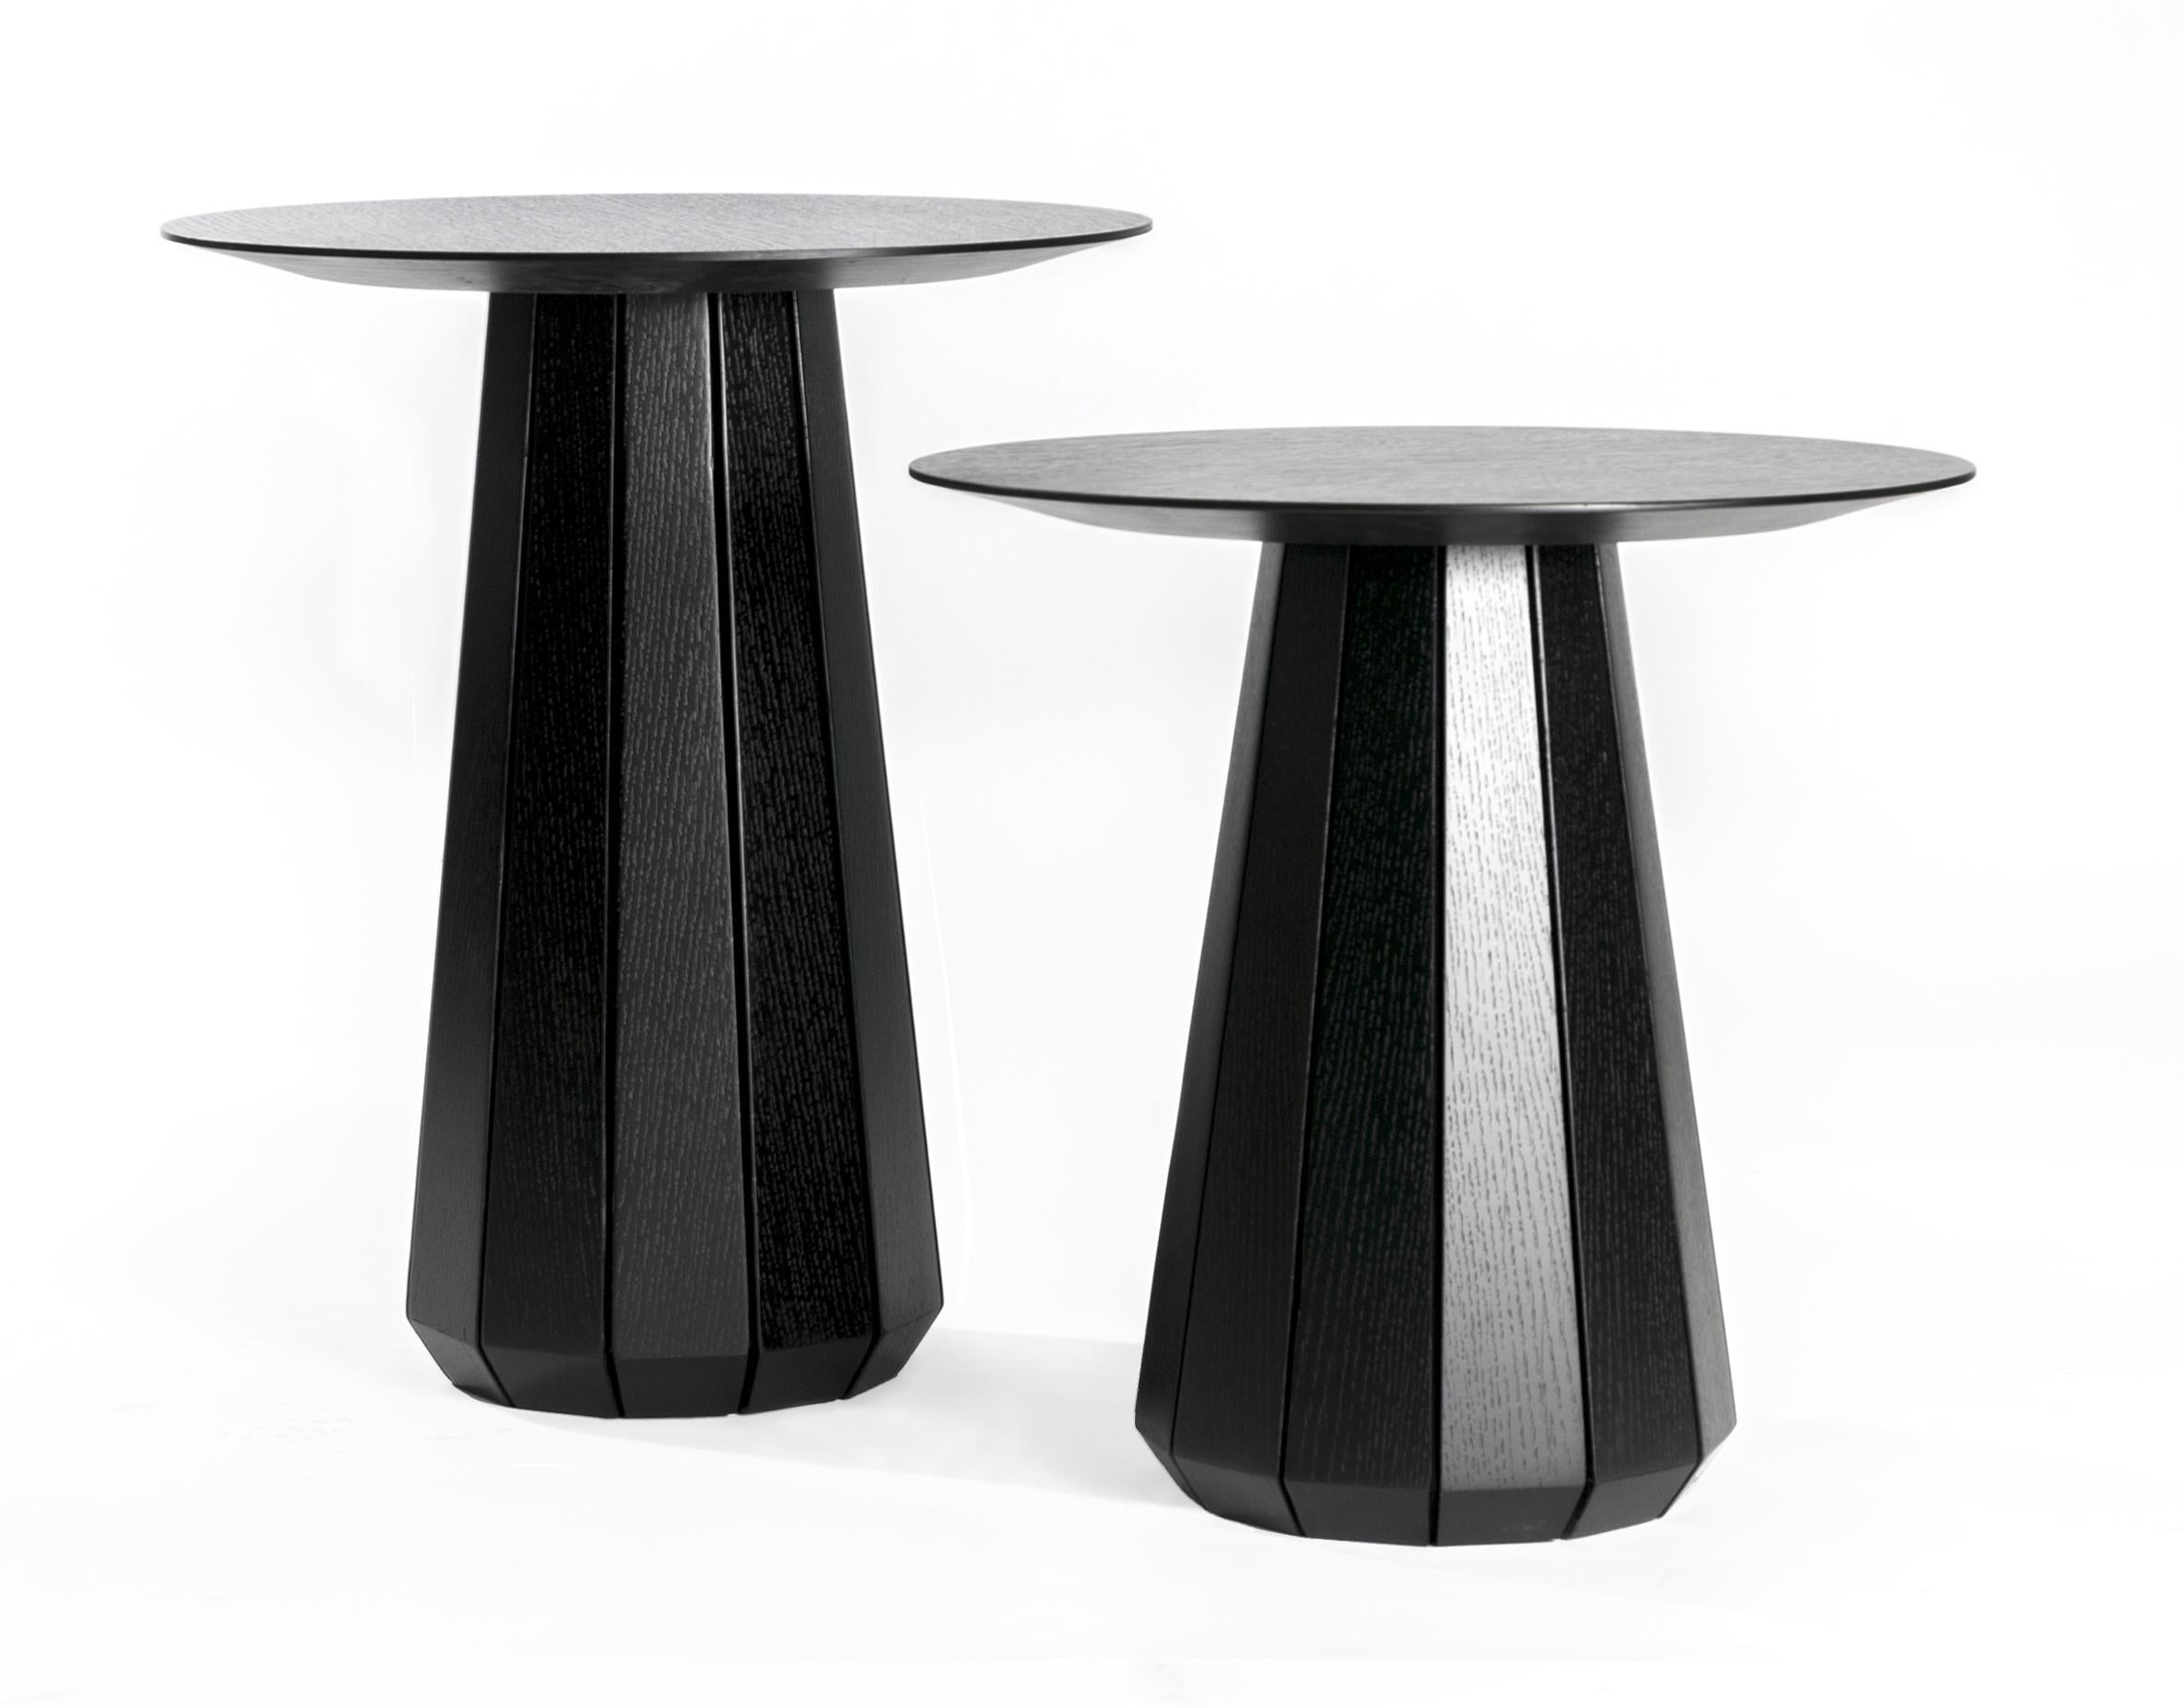 With a multifaceted conical shape, our facet tables are constructed like a barrel. They come in different sizes making them ideal for any area of the house. The Fine shape enhances the elegance to any space, while maintaining staggering